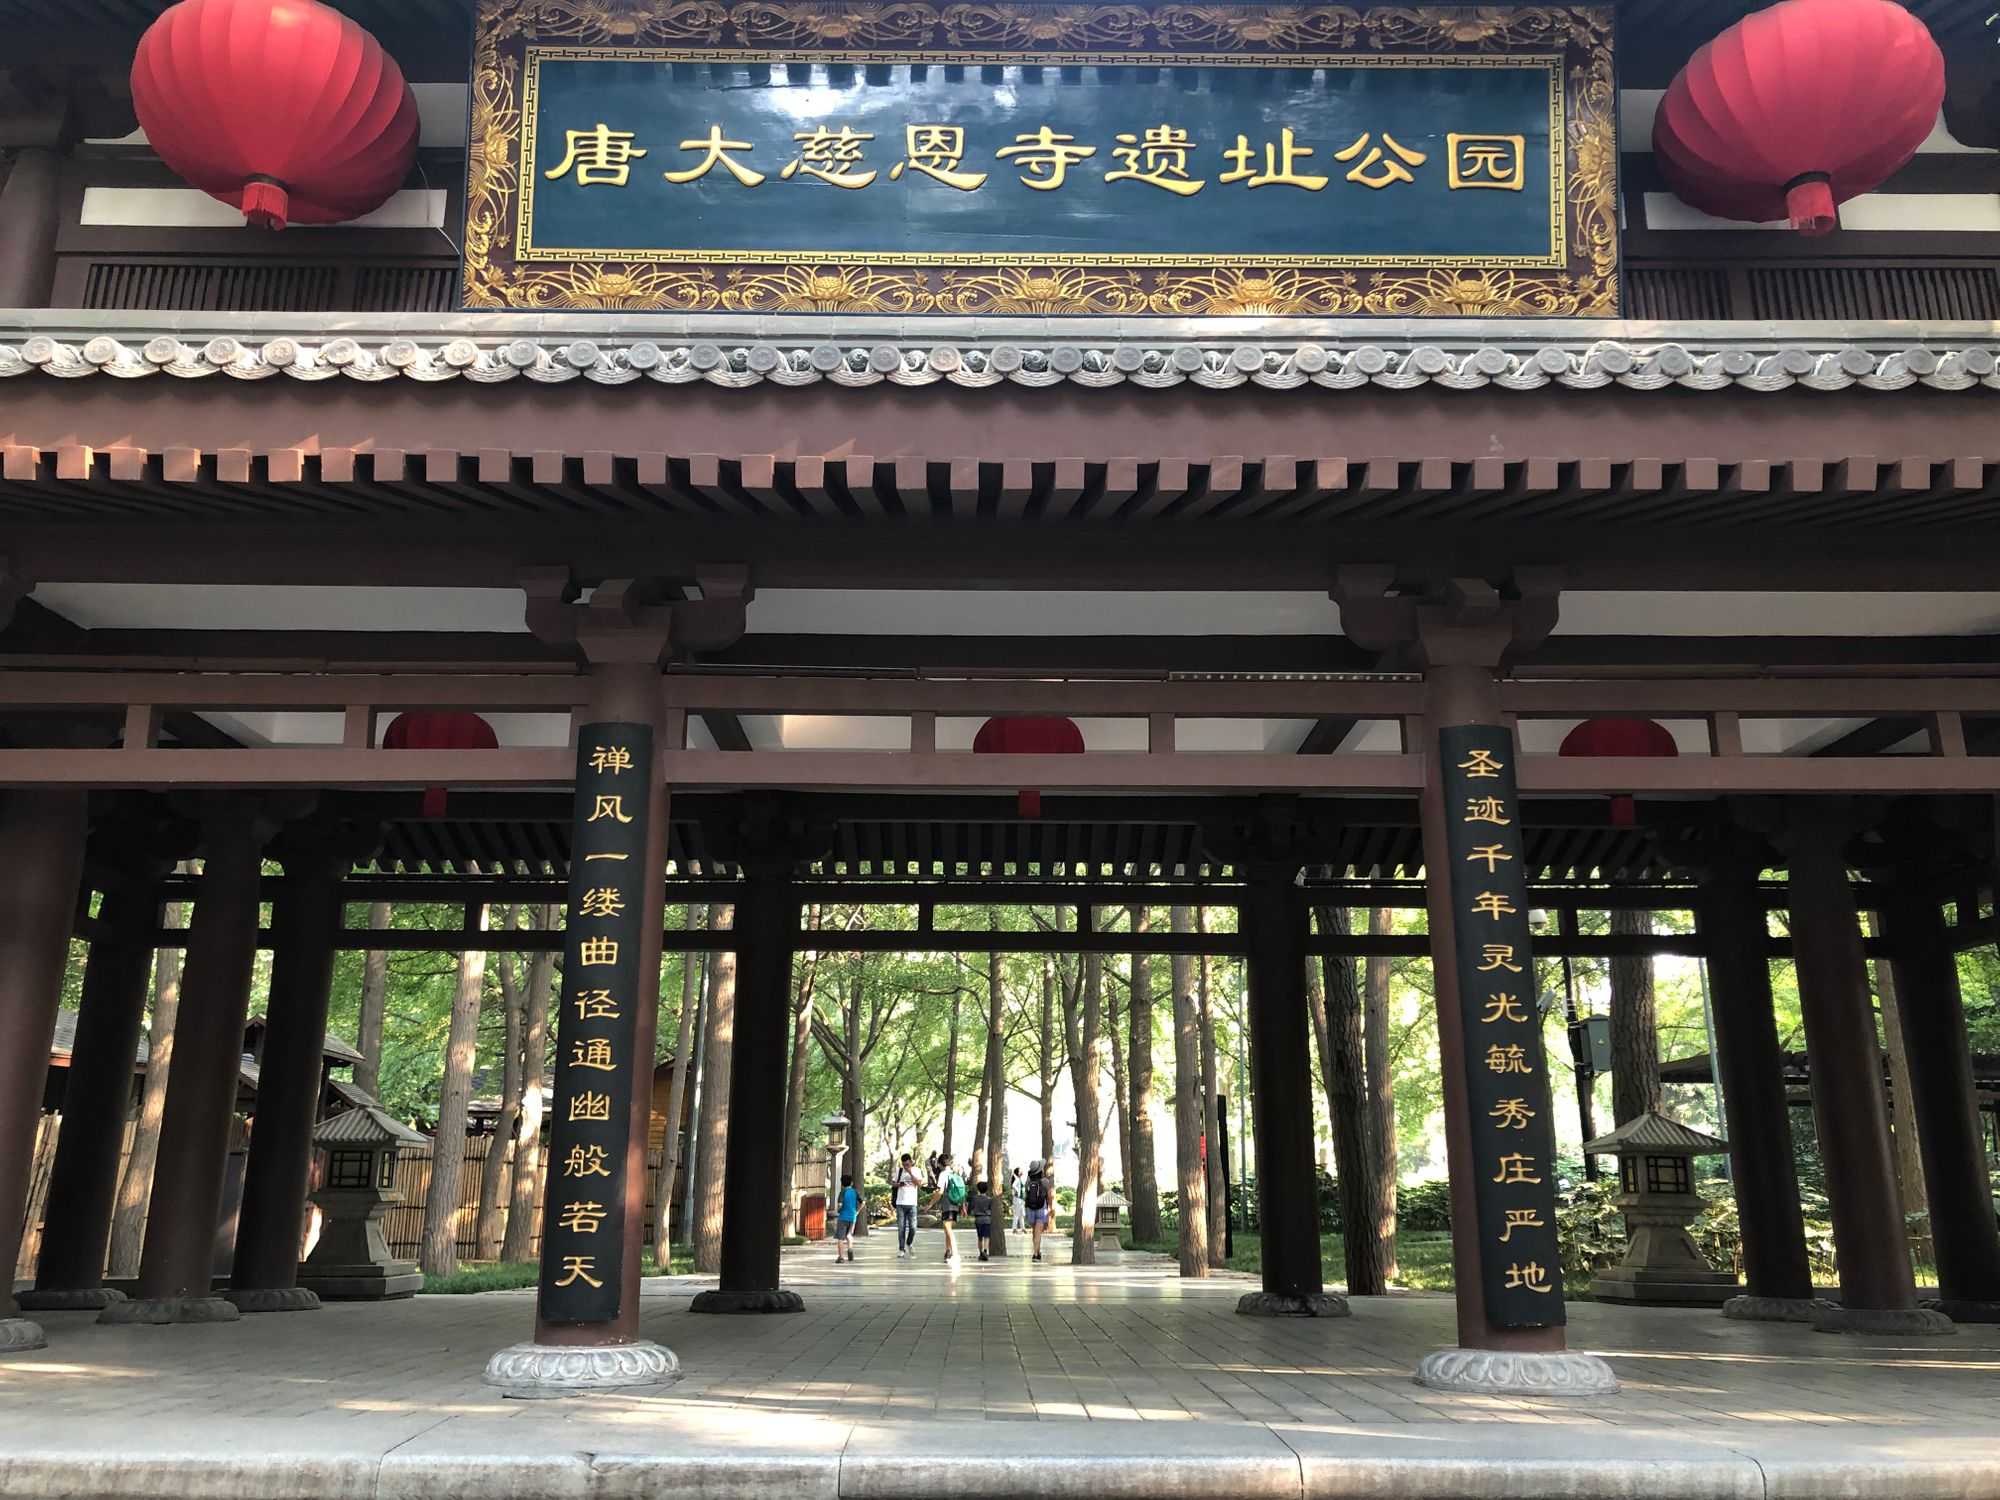 Tangda Ci'ensi Relic Site Park (唐大慈恩寺遗址公园) (Image by author)